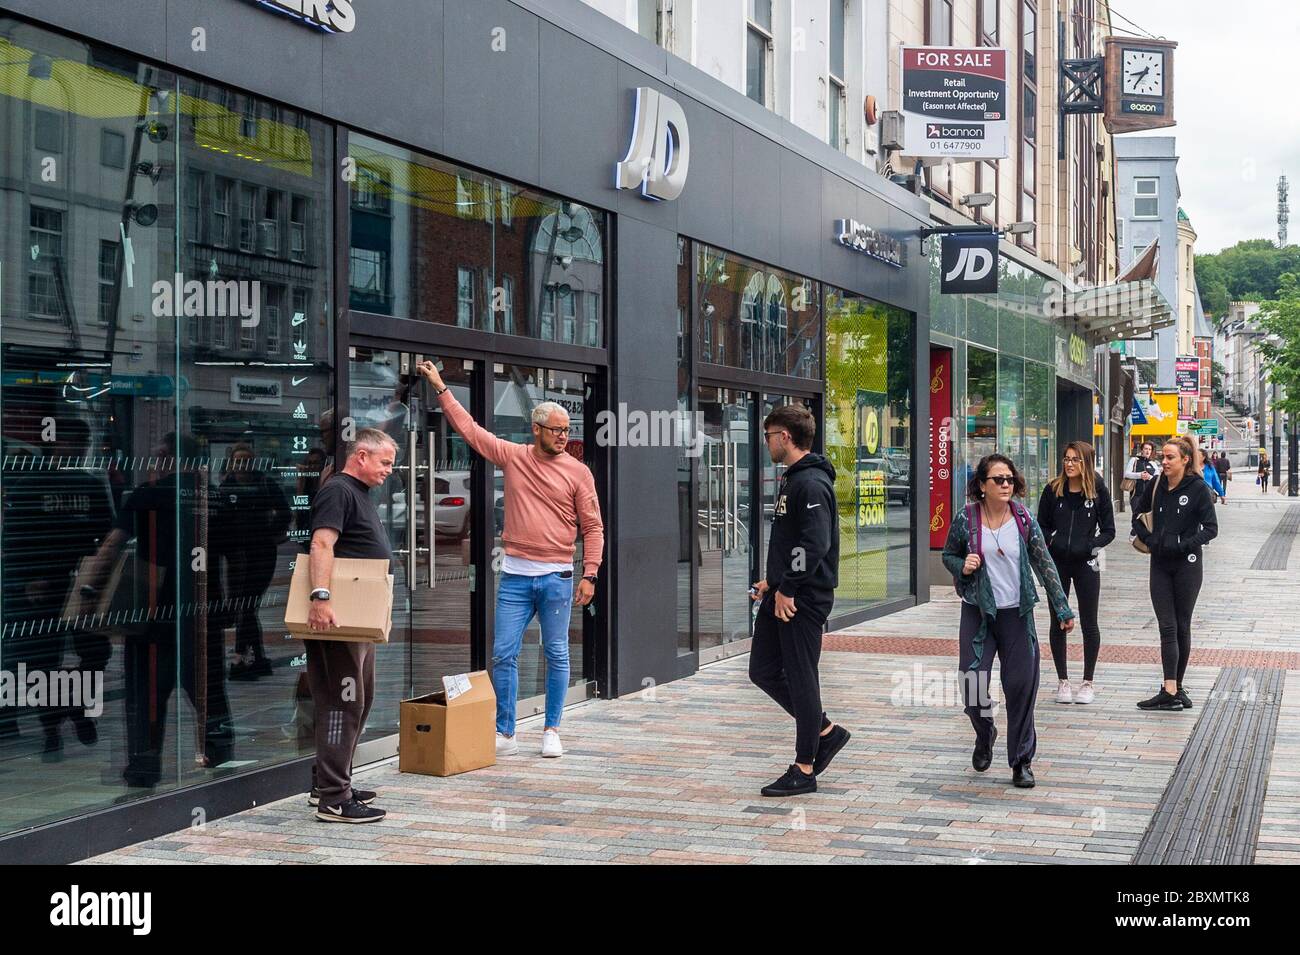 Cork, Ireland. 8th June, 2020. Many shops in Ireland are re-opening today after a 3 month closure due to the Covid-19 pandemic. Staff prepare to enter JD Sports in Patrick Street, Cork. Credit: AG News/Alamy Live News Stock Photo